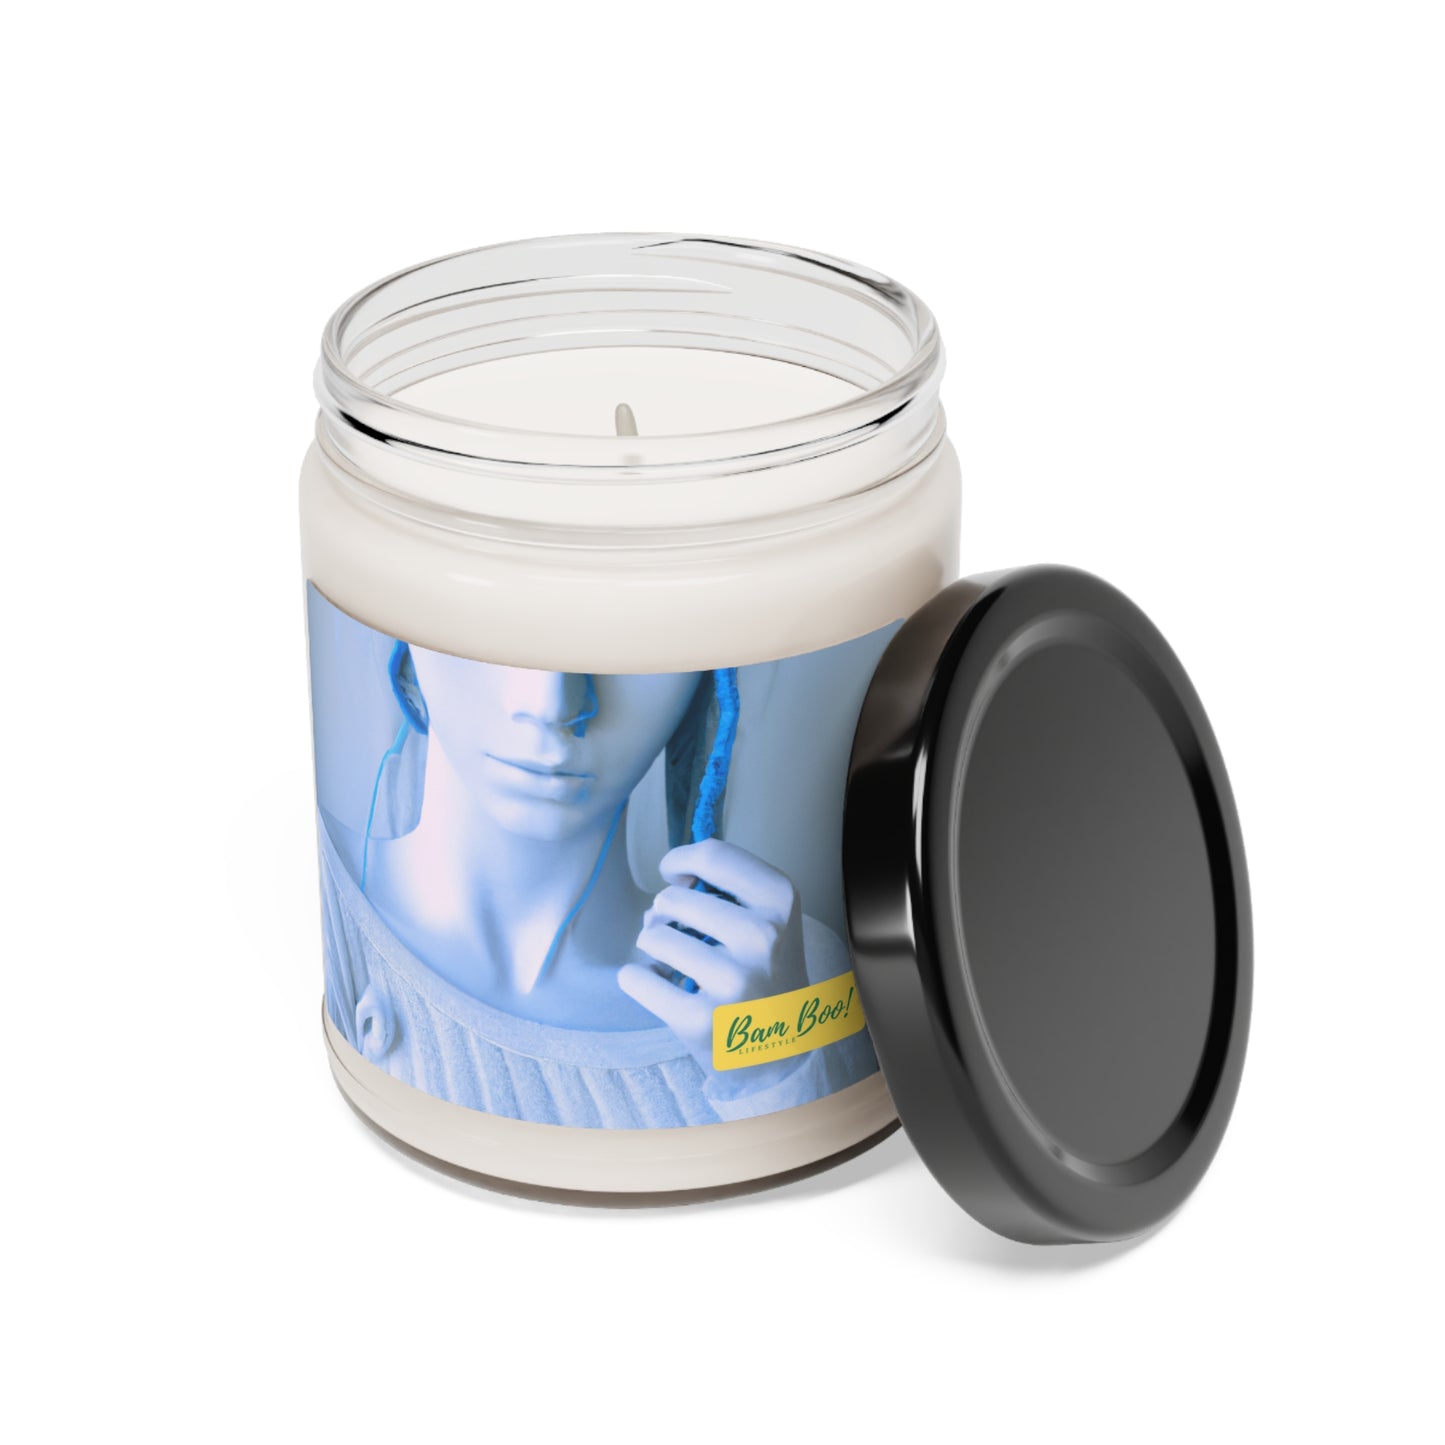 "My Reflection: Capturing What Matters Most" - Bam Boo! Lifestyle Eco-friendly Soy Candle